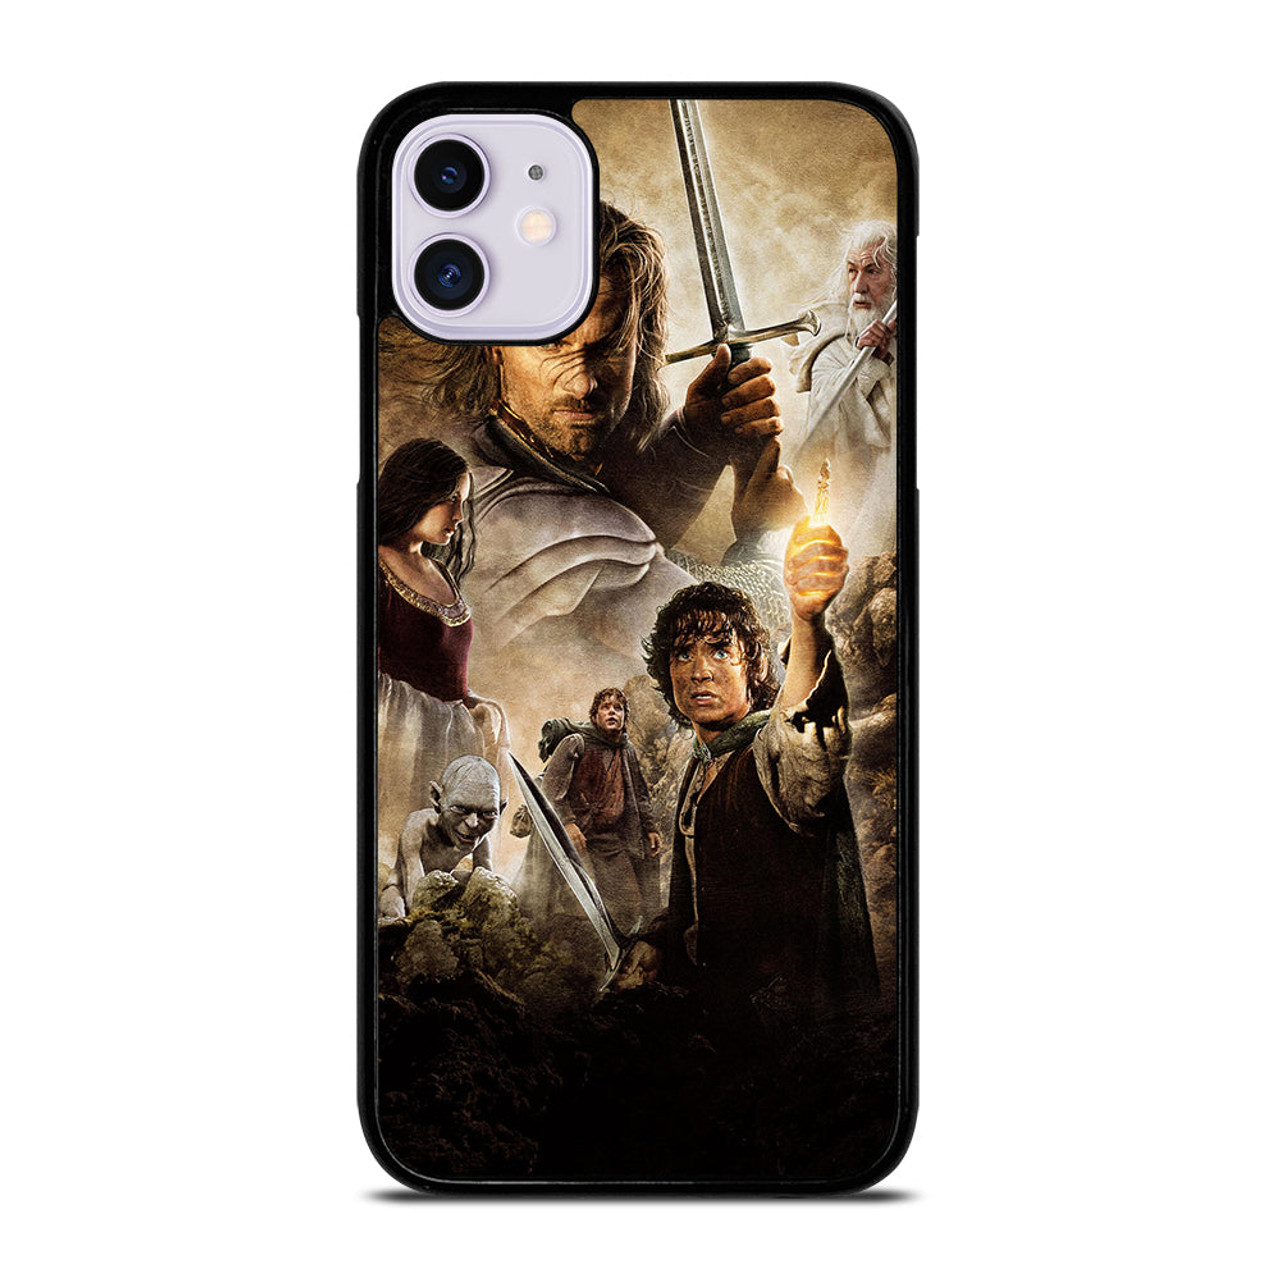 THE LORD OF THE RINGS iPhone 11 Case